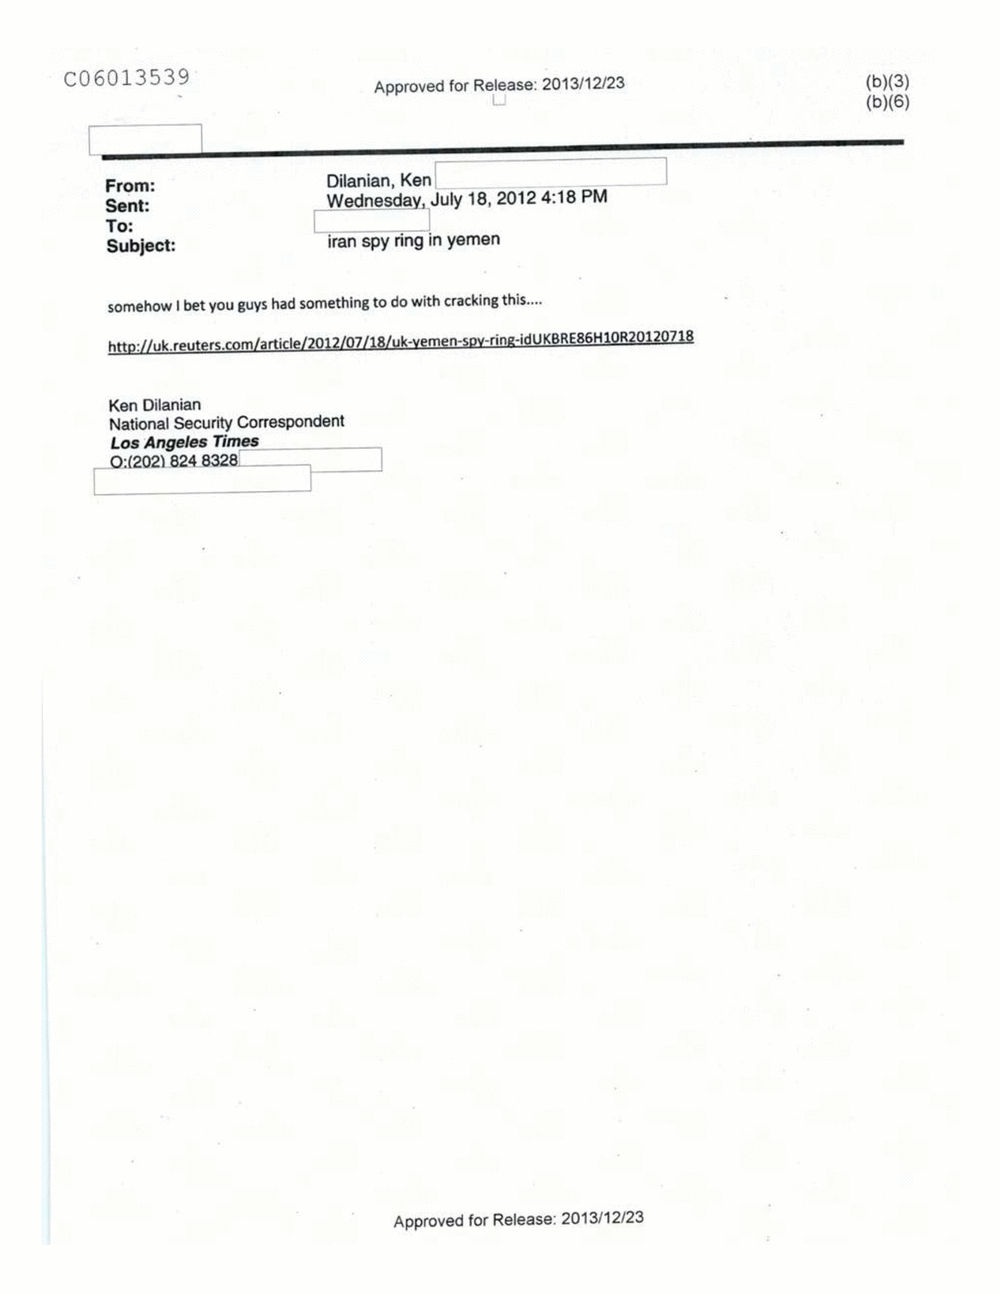 Page 393 from Email Correspondence Between Reporters and CIA Flacks